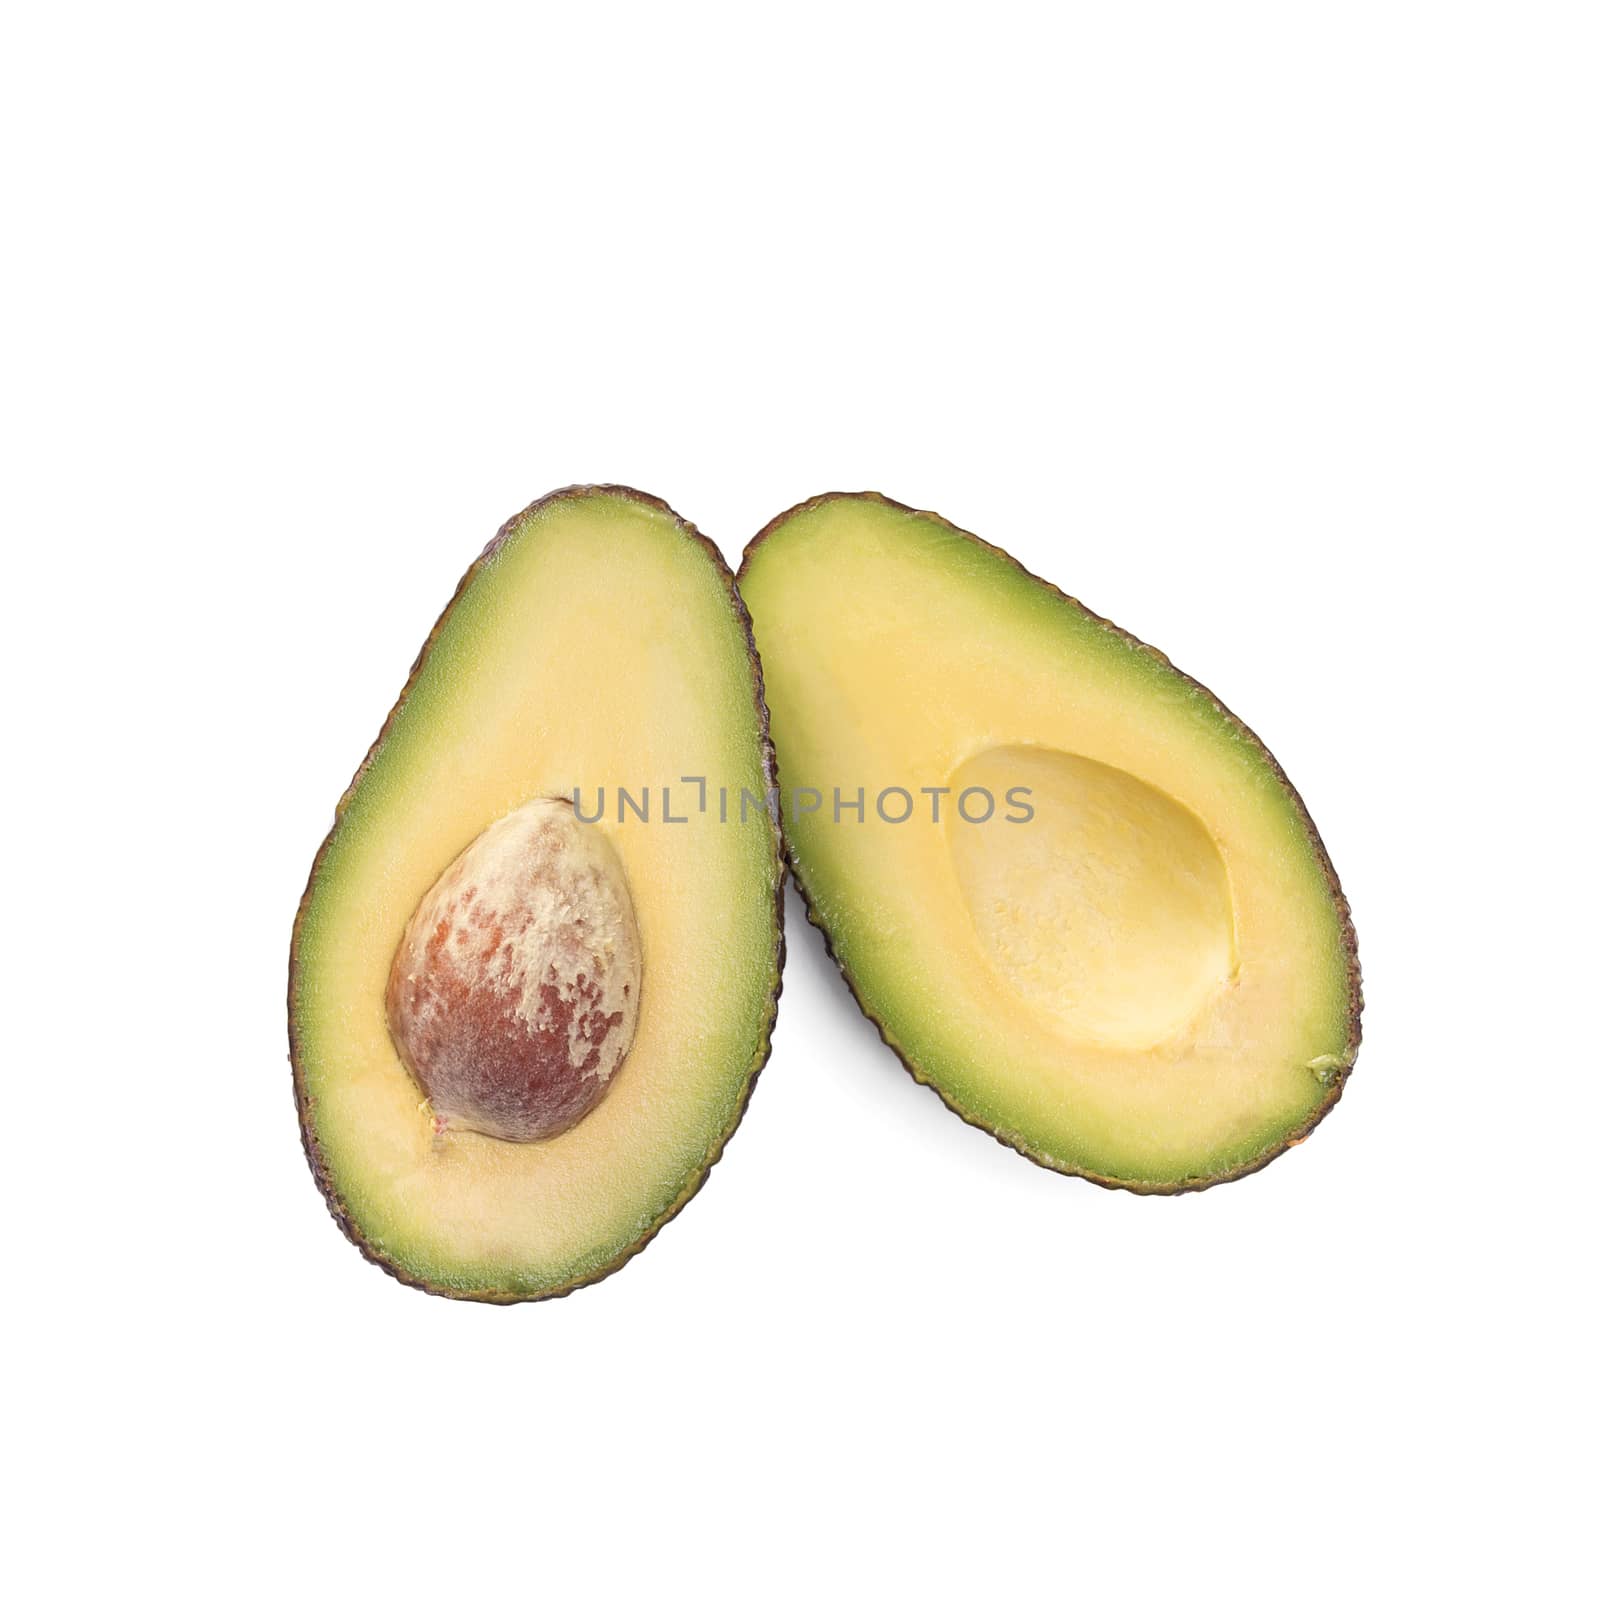 Two slices of avocado isolated on the white background. One slice with core. Design element for product label.